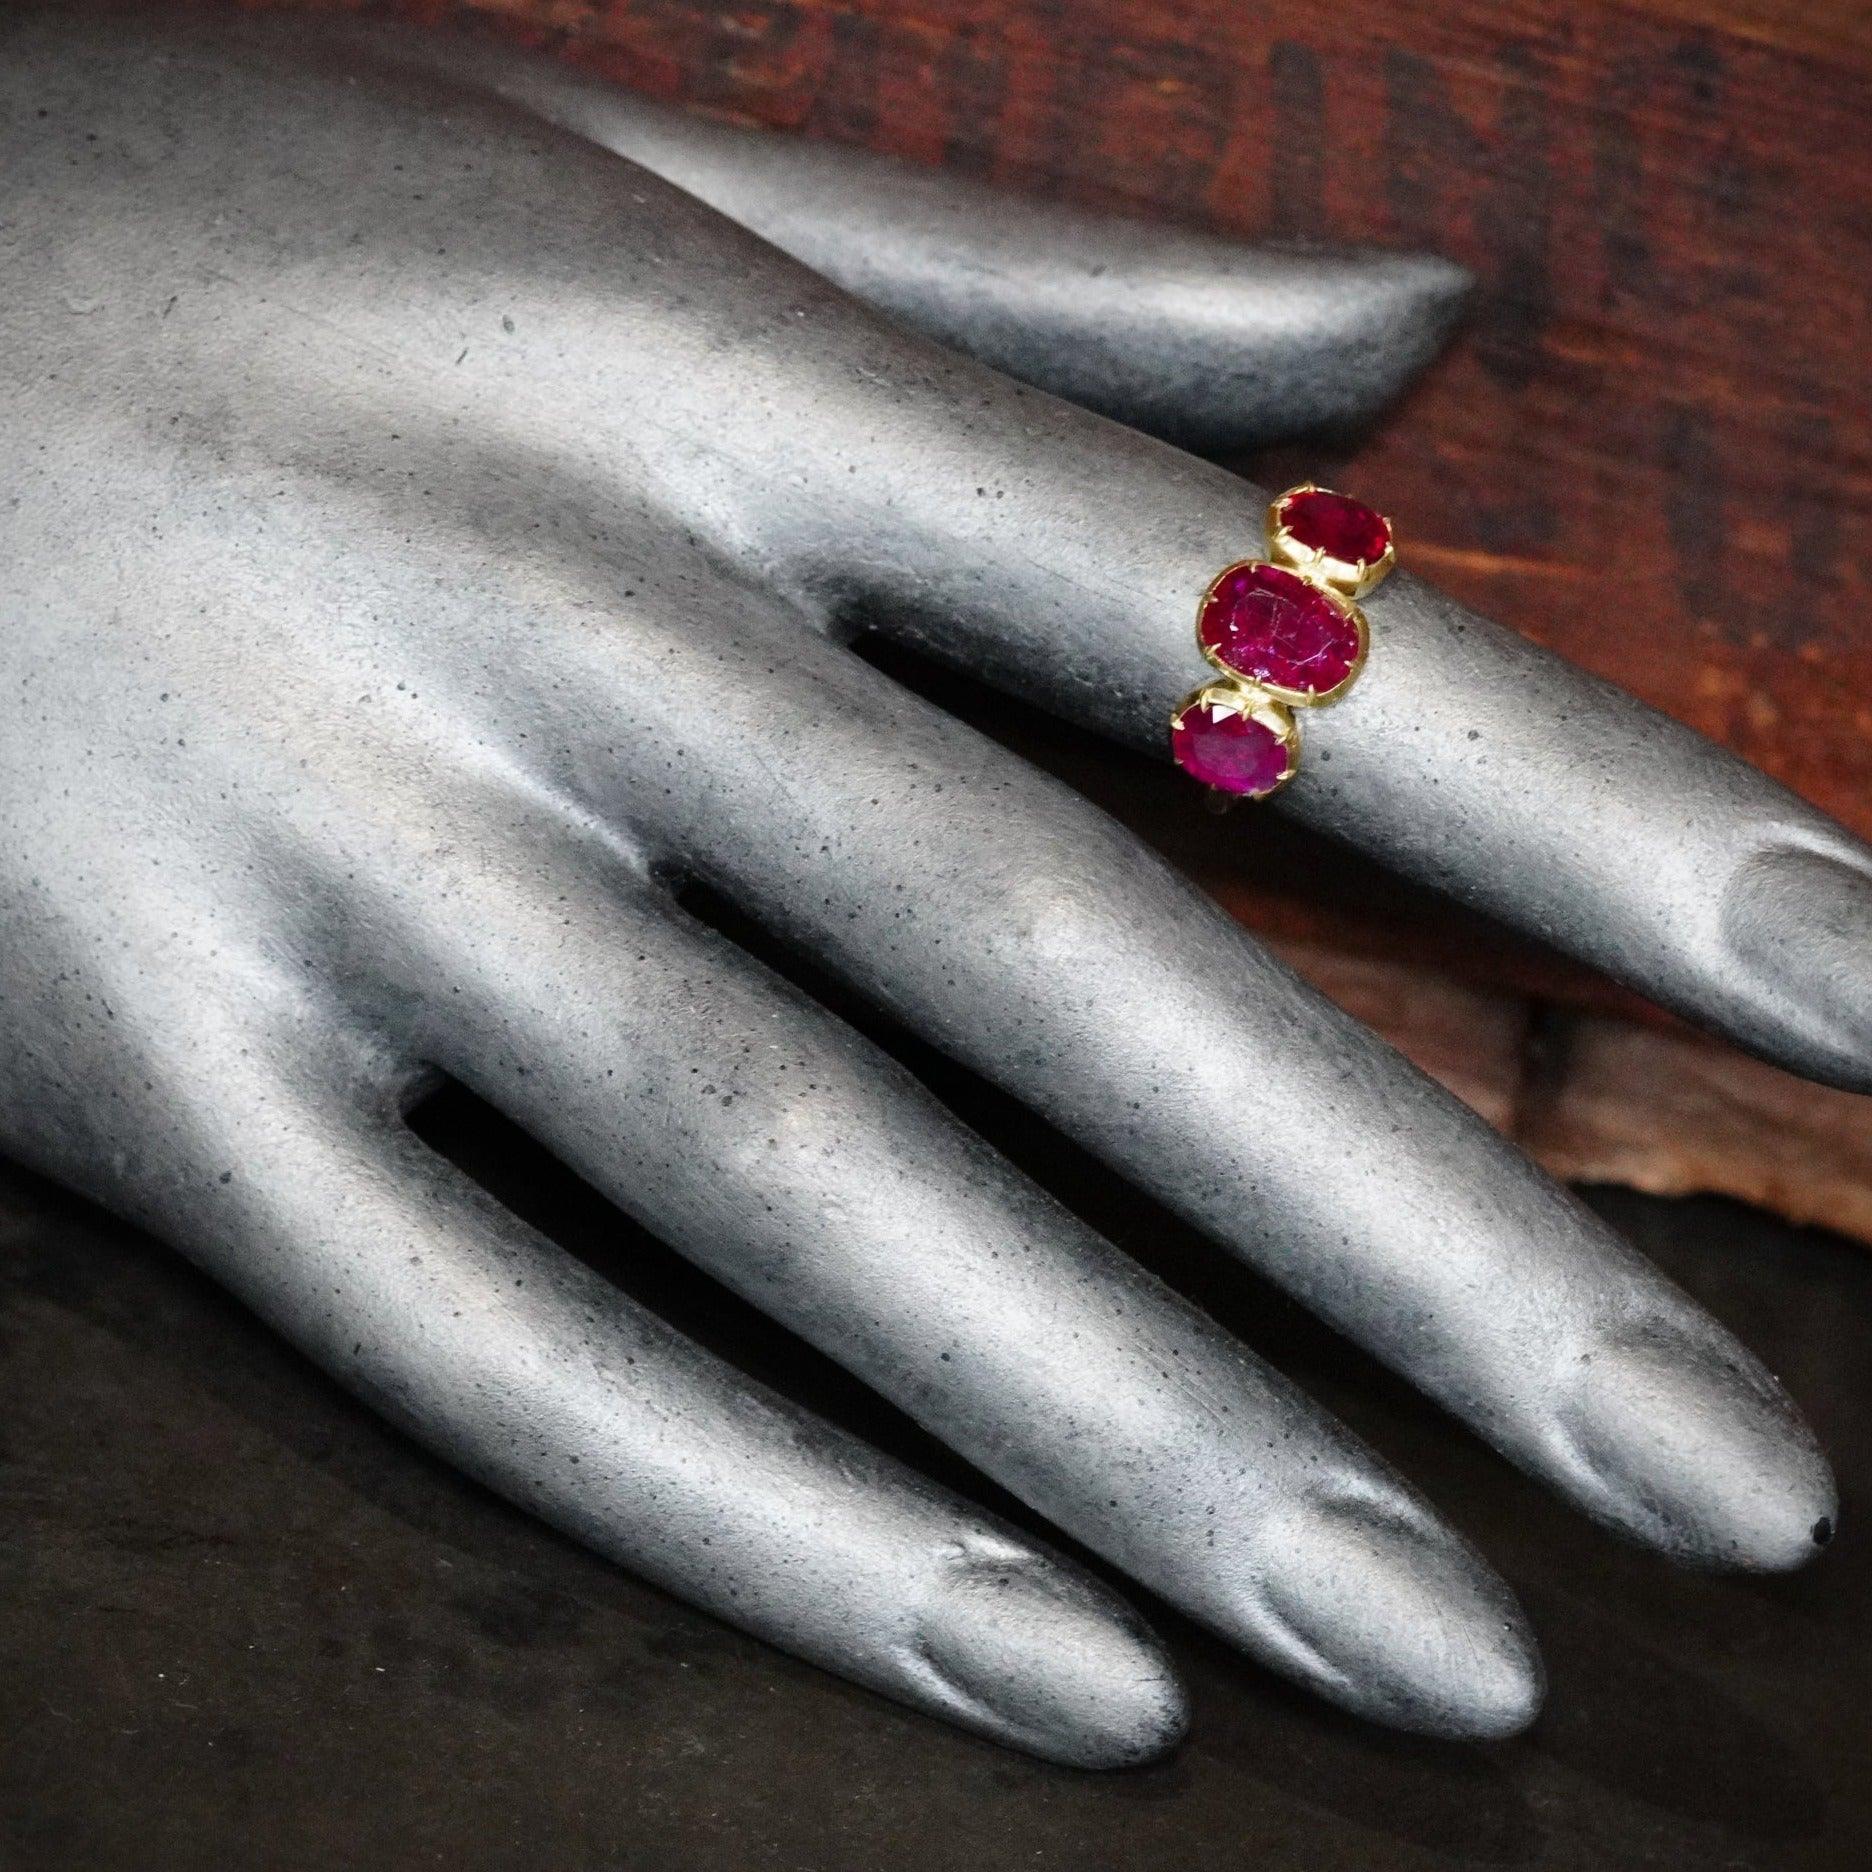 Precious and captivating collet ring with a Burma ruby, a symbol of enduring love in Victorian style